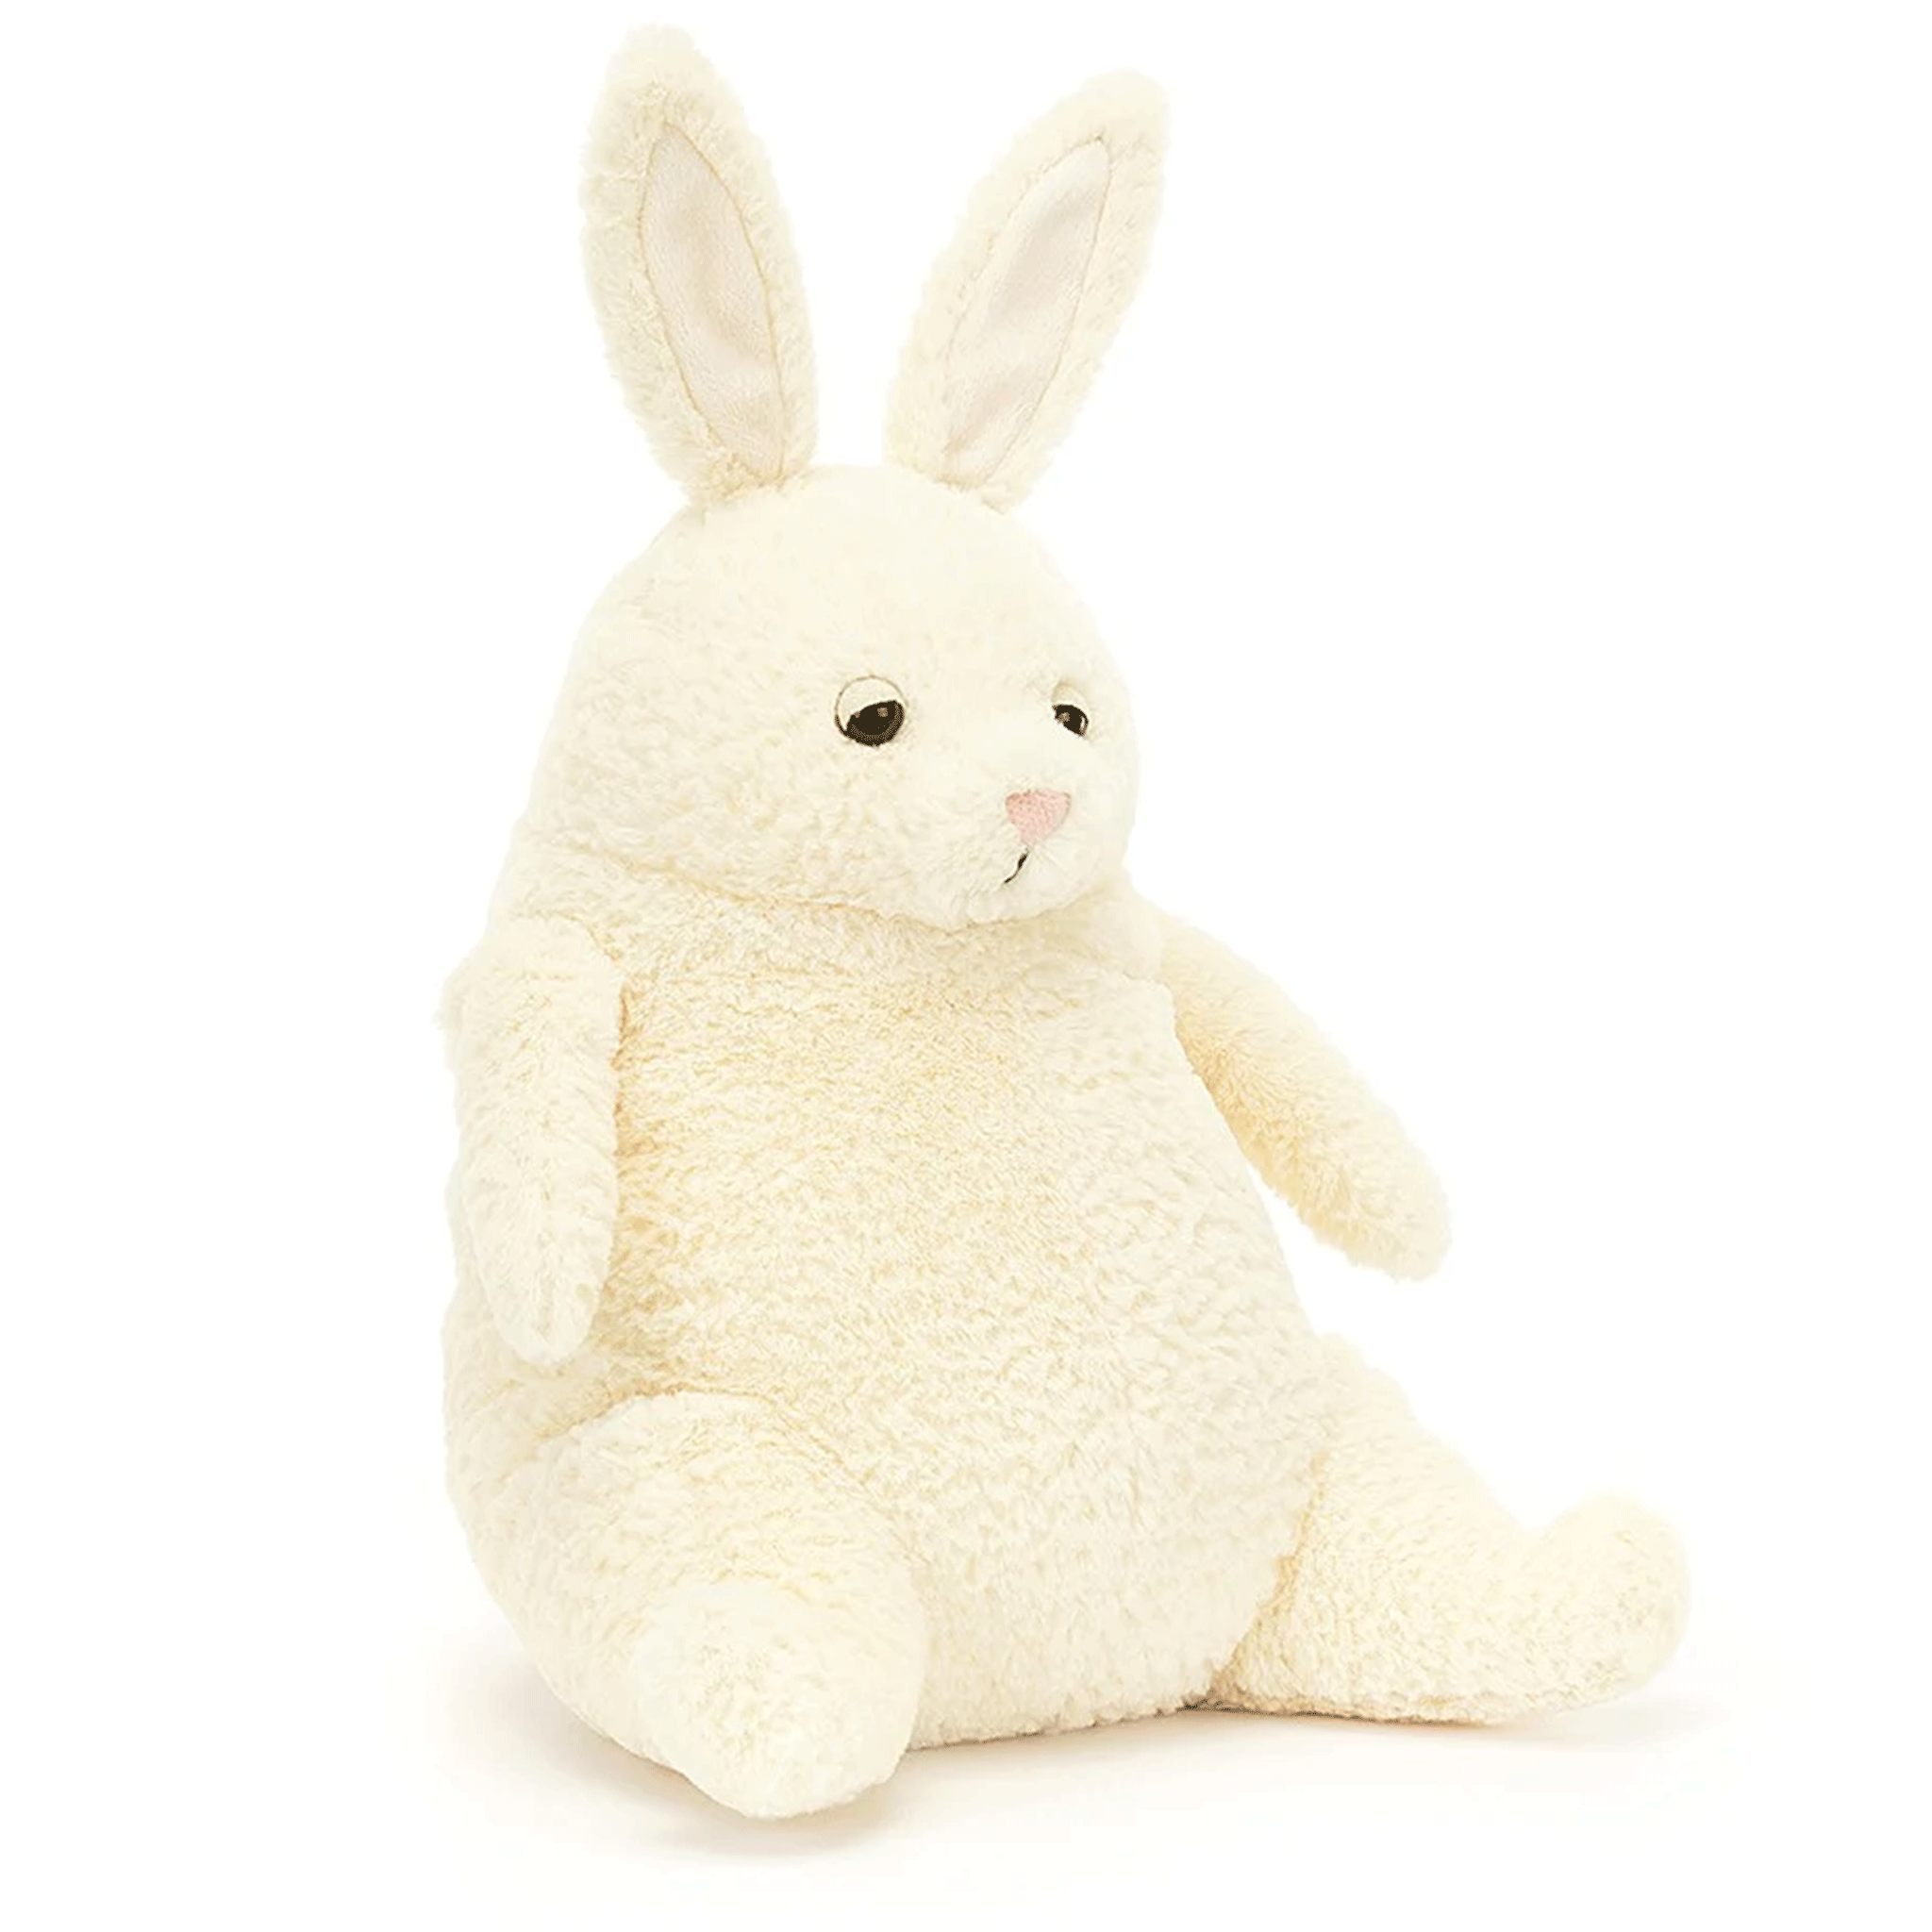 On a white background is a cream colored bunny stuffed toy with long ears and a cuddly body. 